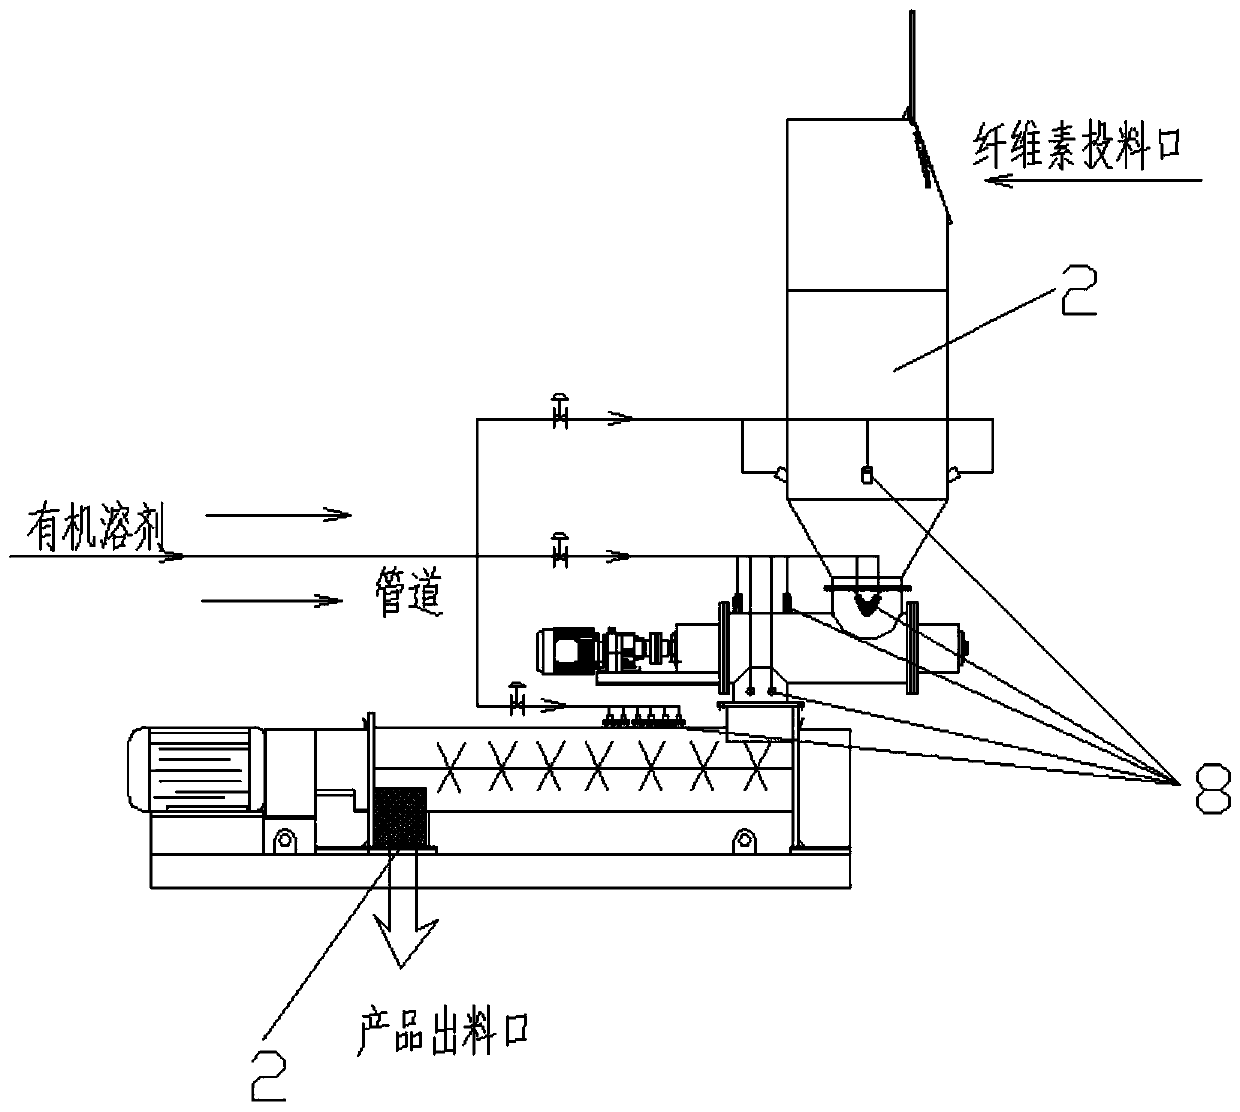 Rapid cellulose wetting equipment and rapid cellulose wetting process